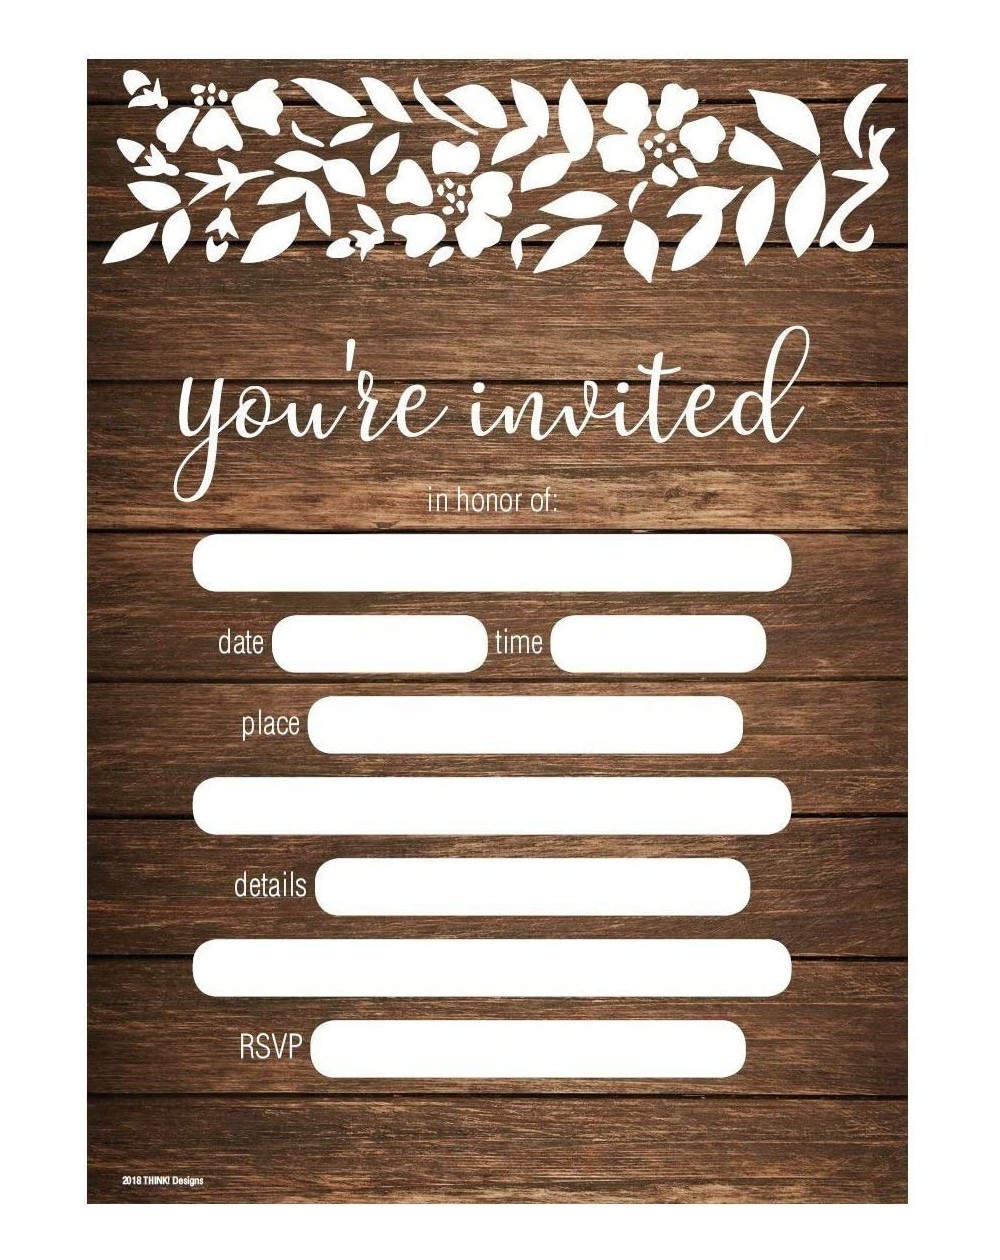 Invitations Wedding Invitations 5x7 50ct You're Invited Rustic Country Wood Floral Lace Fill in Party Invitation Any Bridal S...